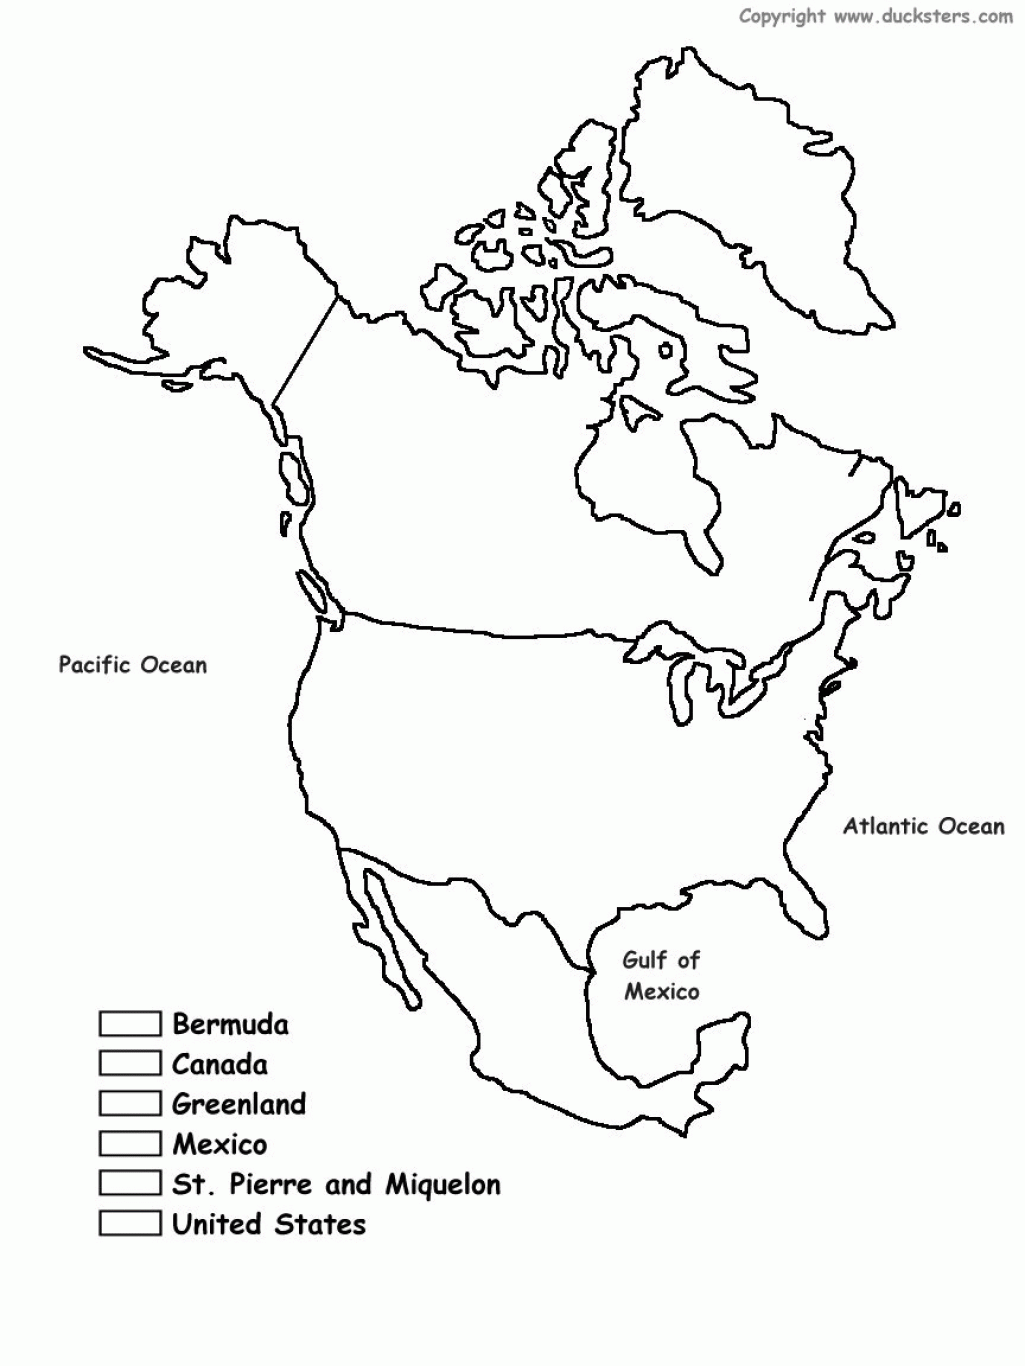 map of north america drawing - Clip Art Library With World Biome Map Coloring Worksheet